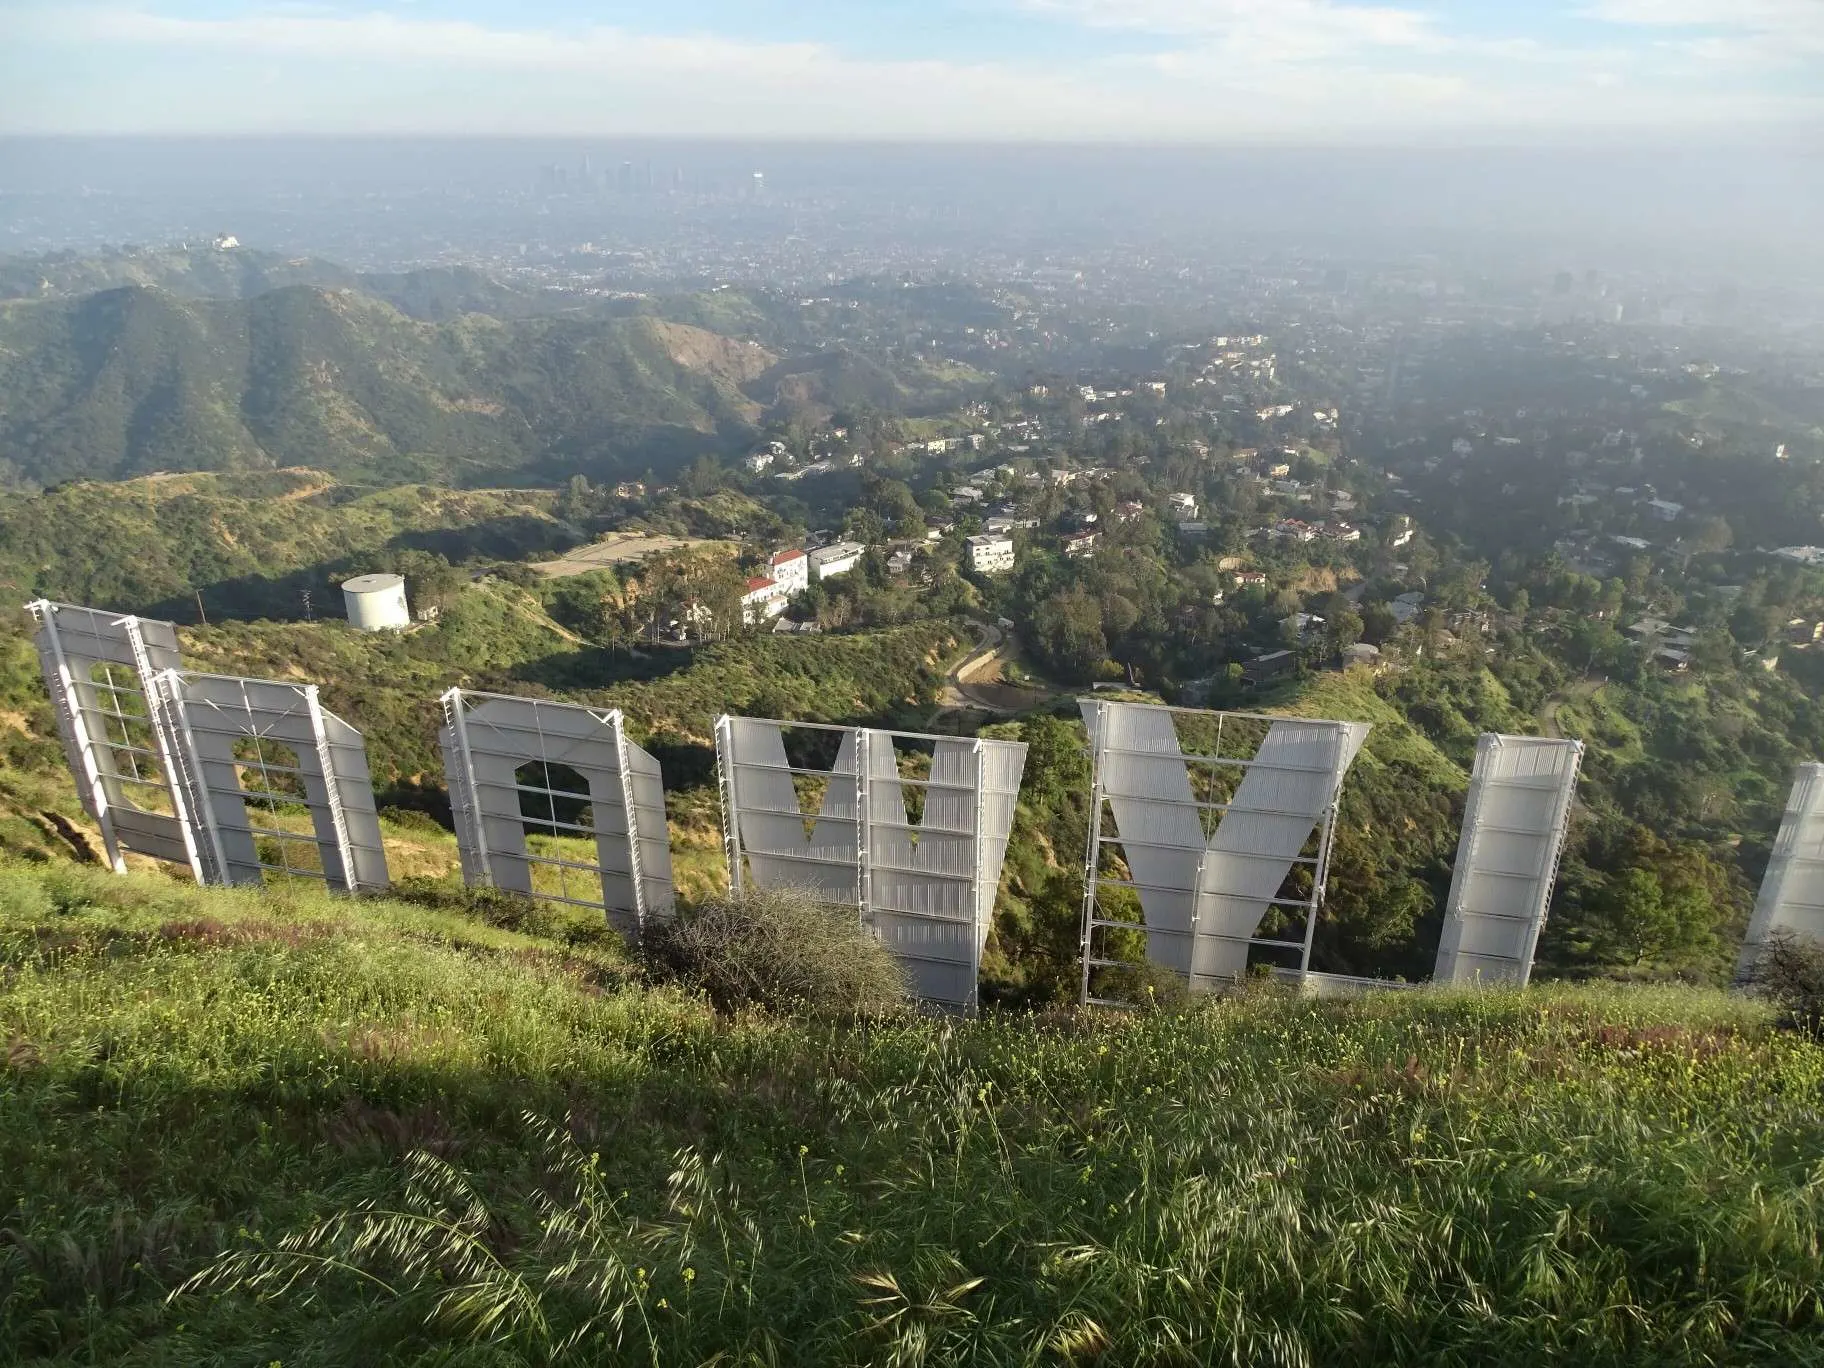 View from behind the Hollywood sign letters